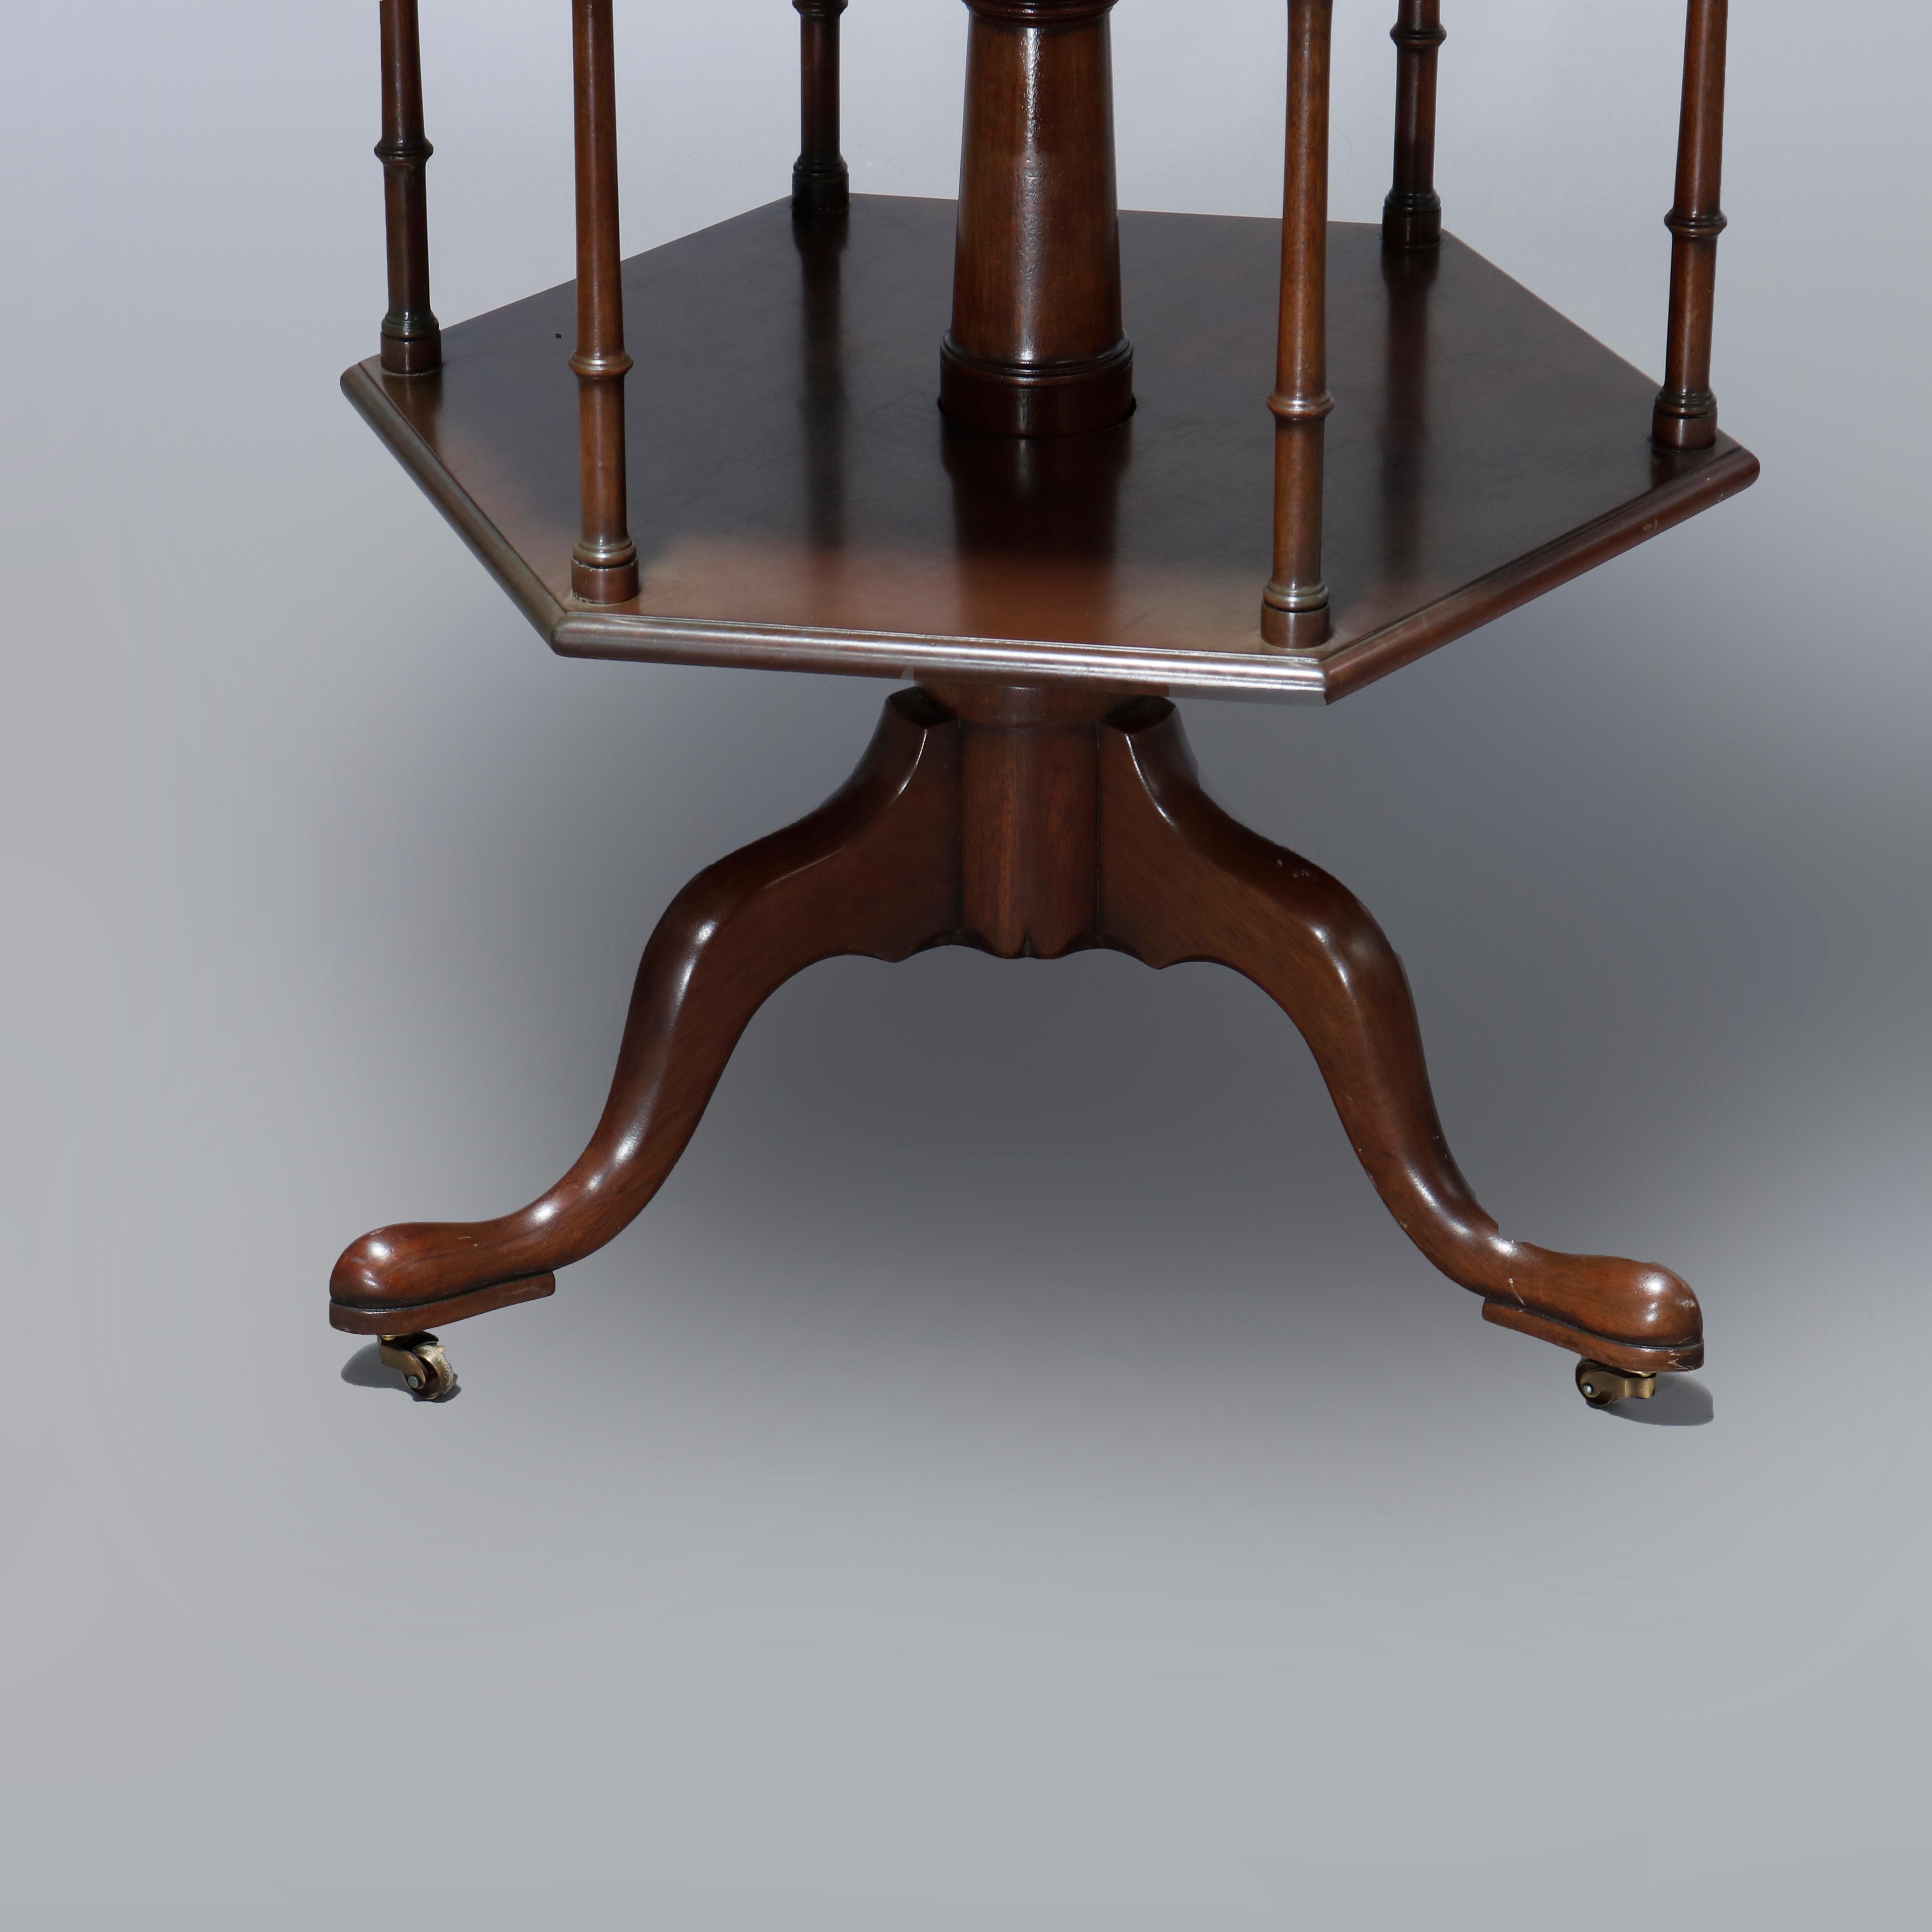 Carved Kittinger Colonial Williamsburg Queen Anne Mahogany Revolving Server, 20th C For Sale